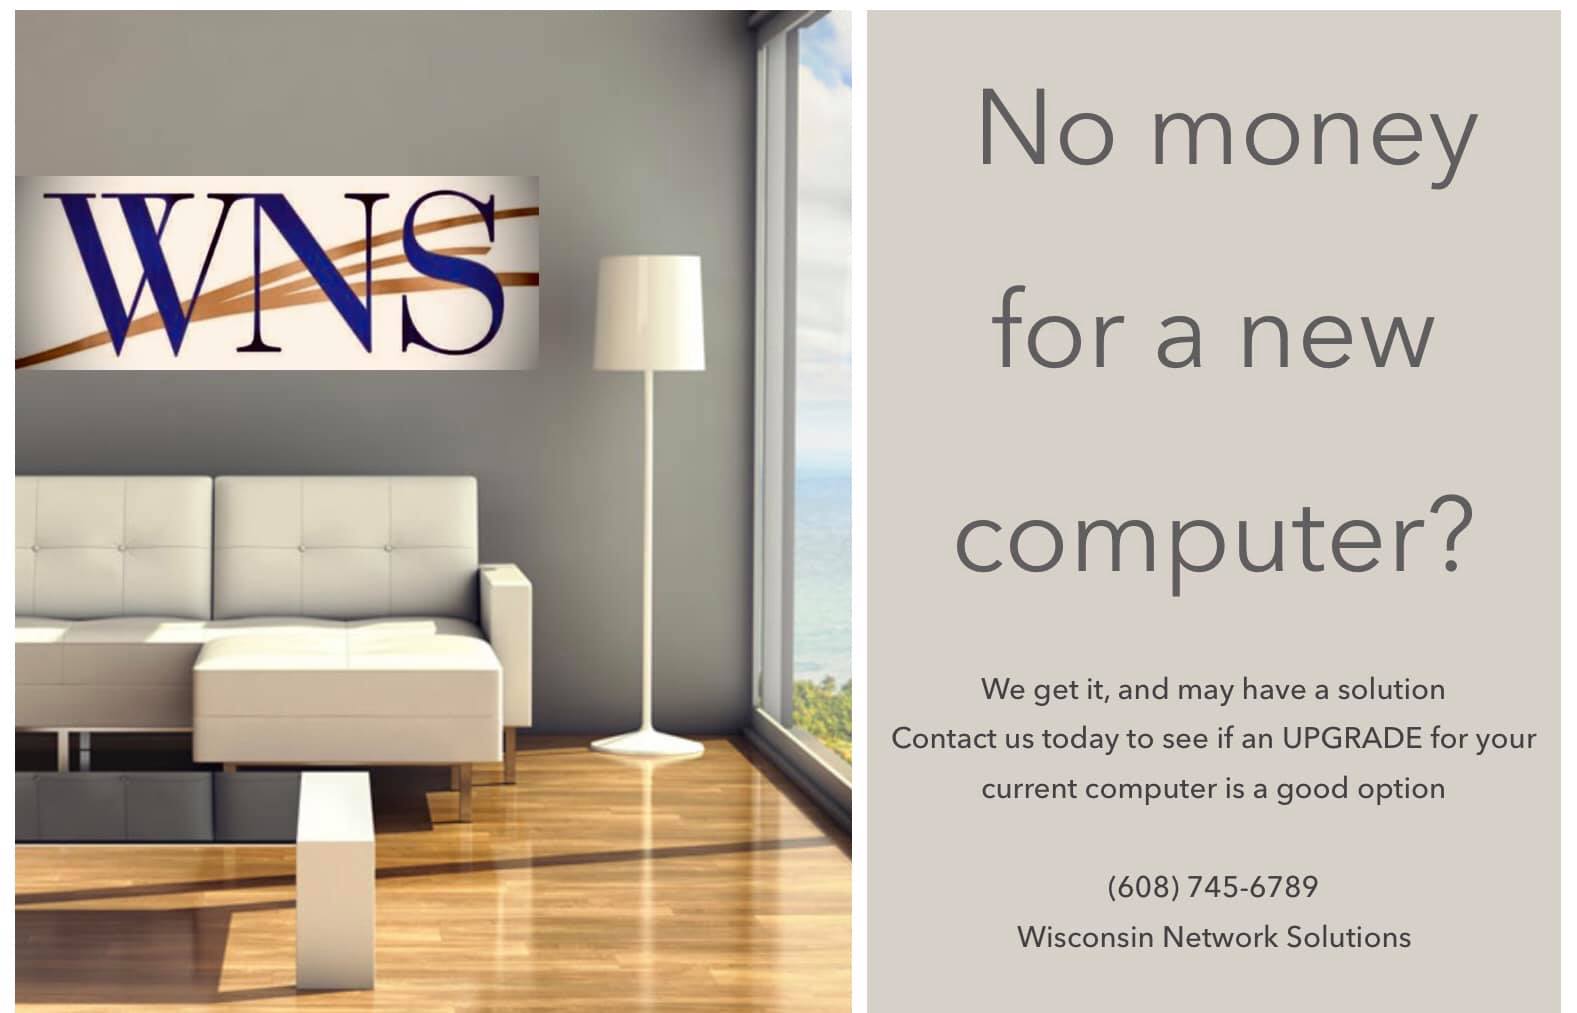 Wisconsin Network Solutions LLC 1 Main St, Portage Wisconsin 53901